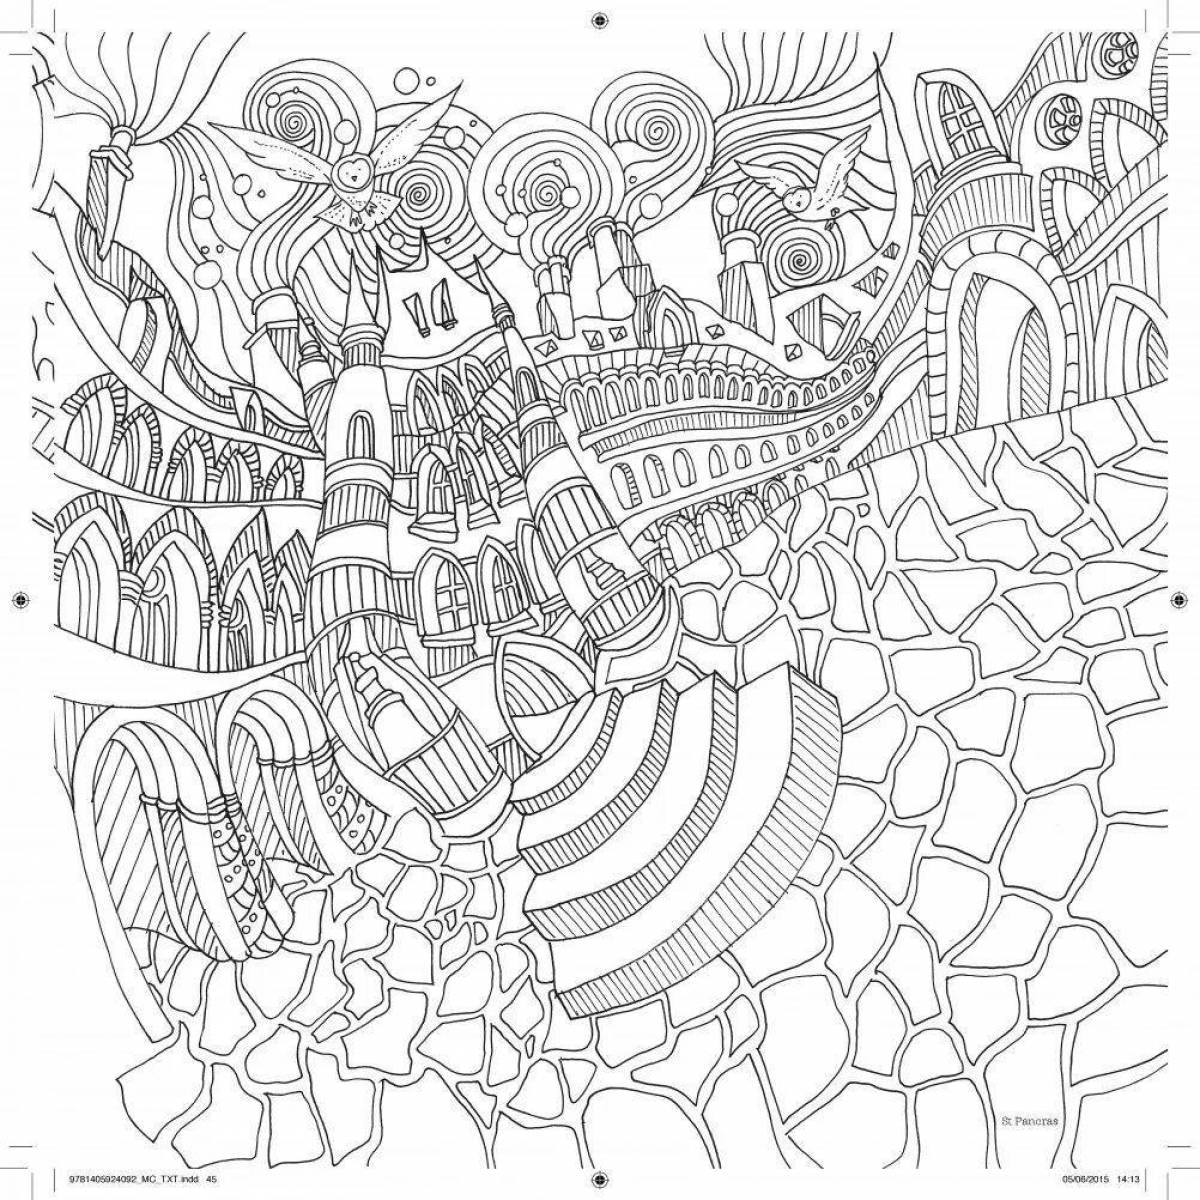 Delightful coloring of the magic of the cities of the world